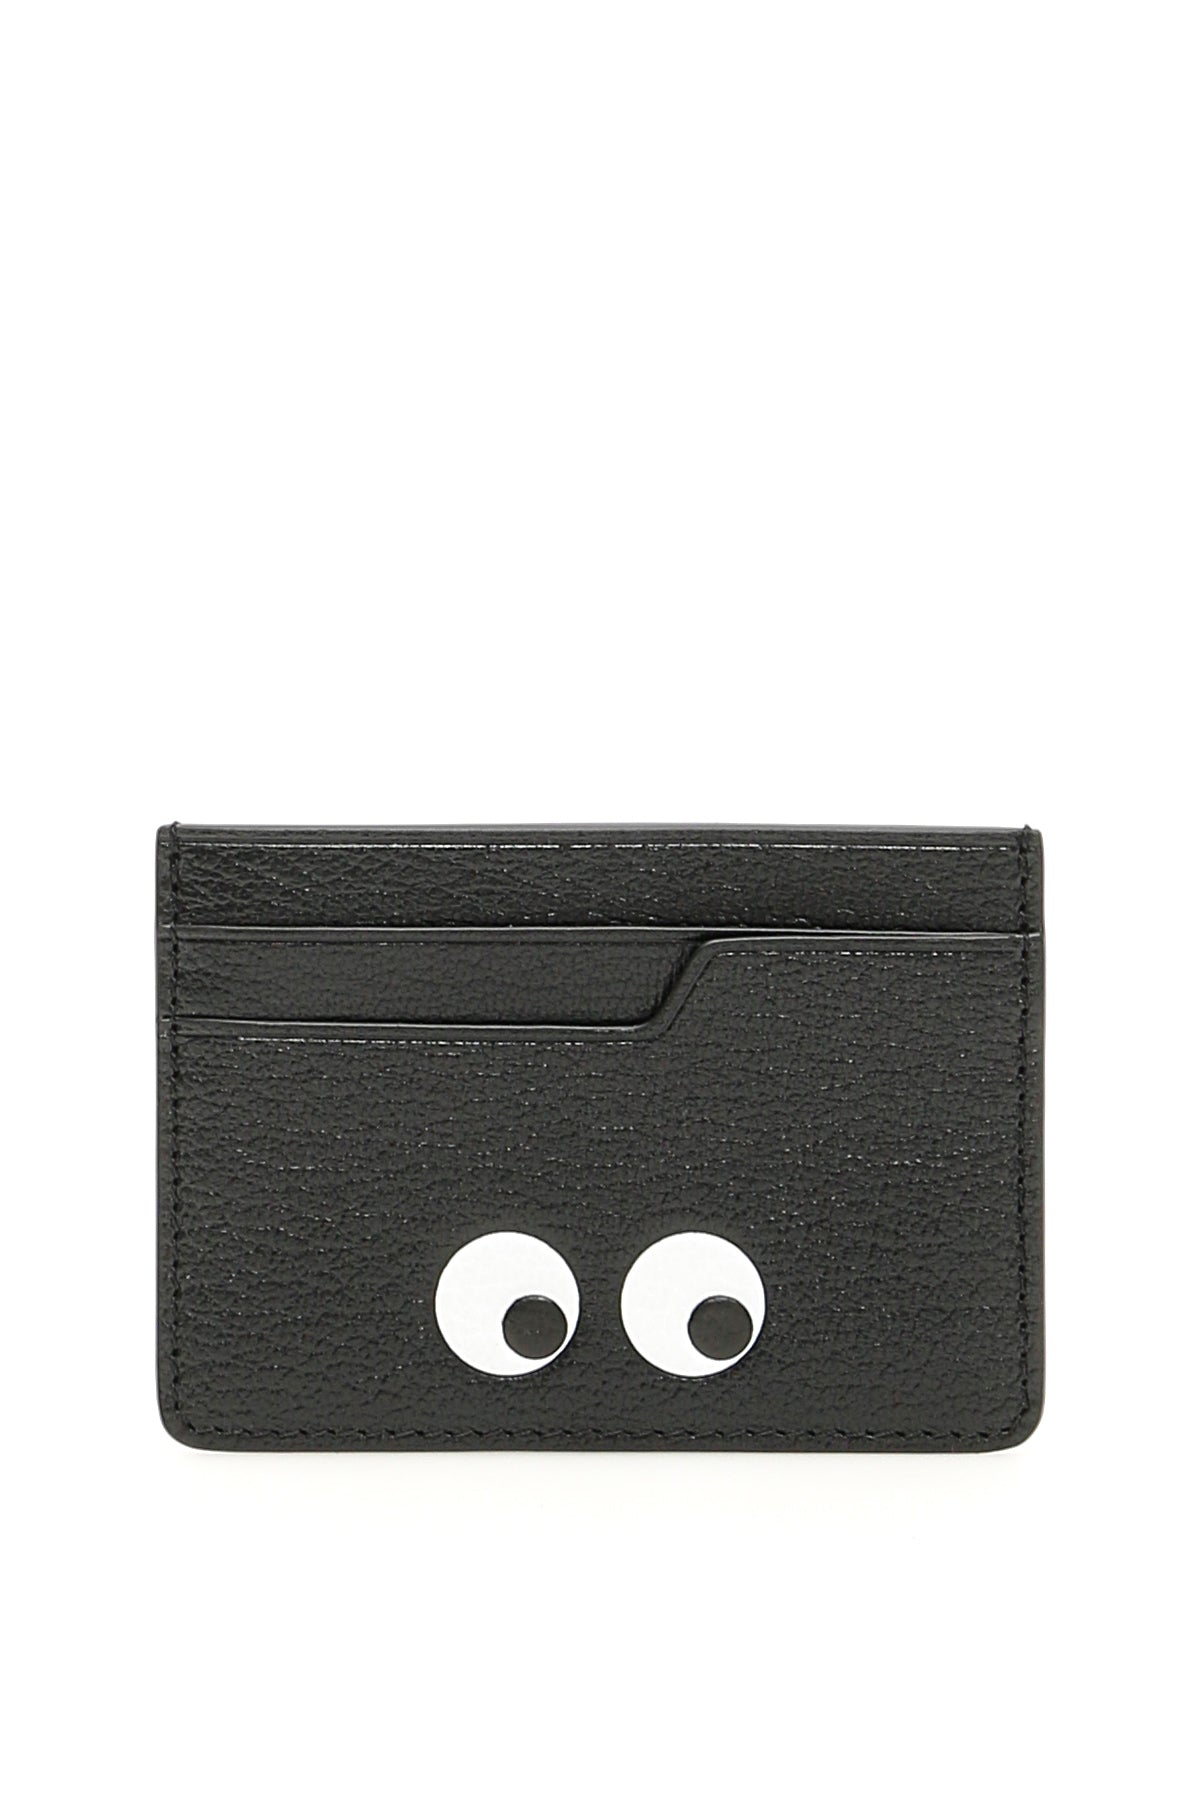 Eyes Cardholder-women > accessories > wallets and small leather goods > card holders-Anya Hindmarch-os-Nero-Urbanheer